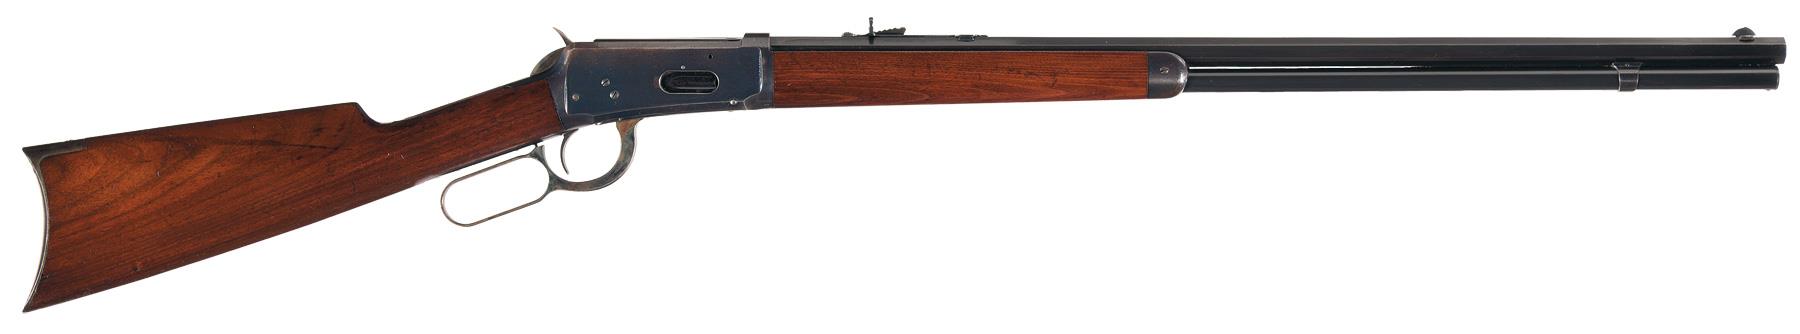 Winchester 1894 Rifle 38-55